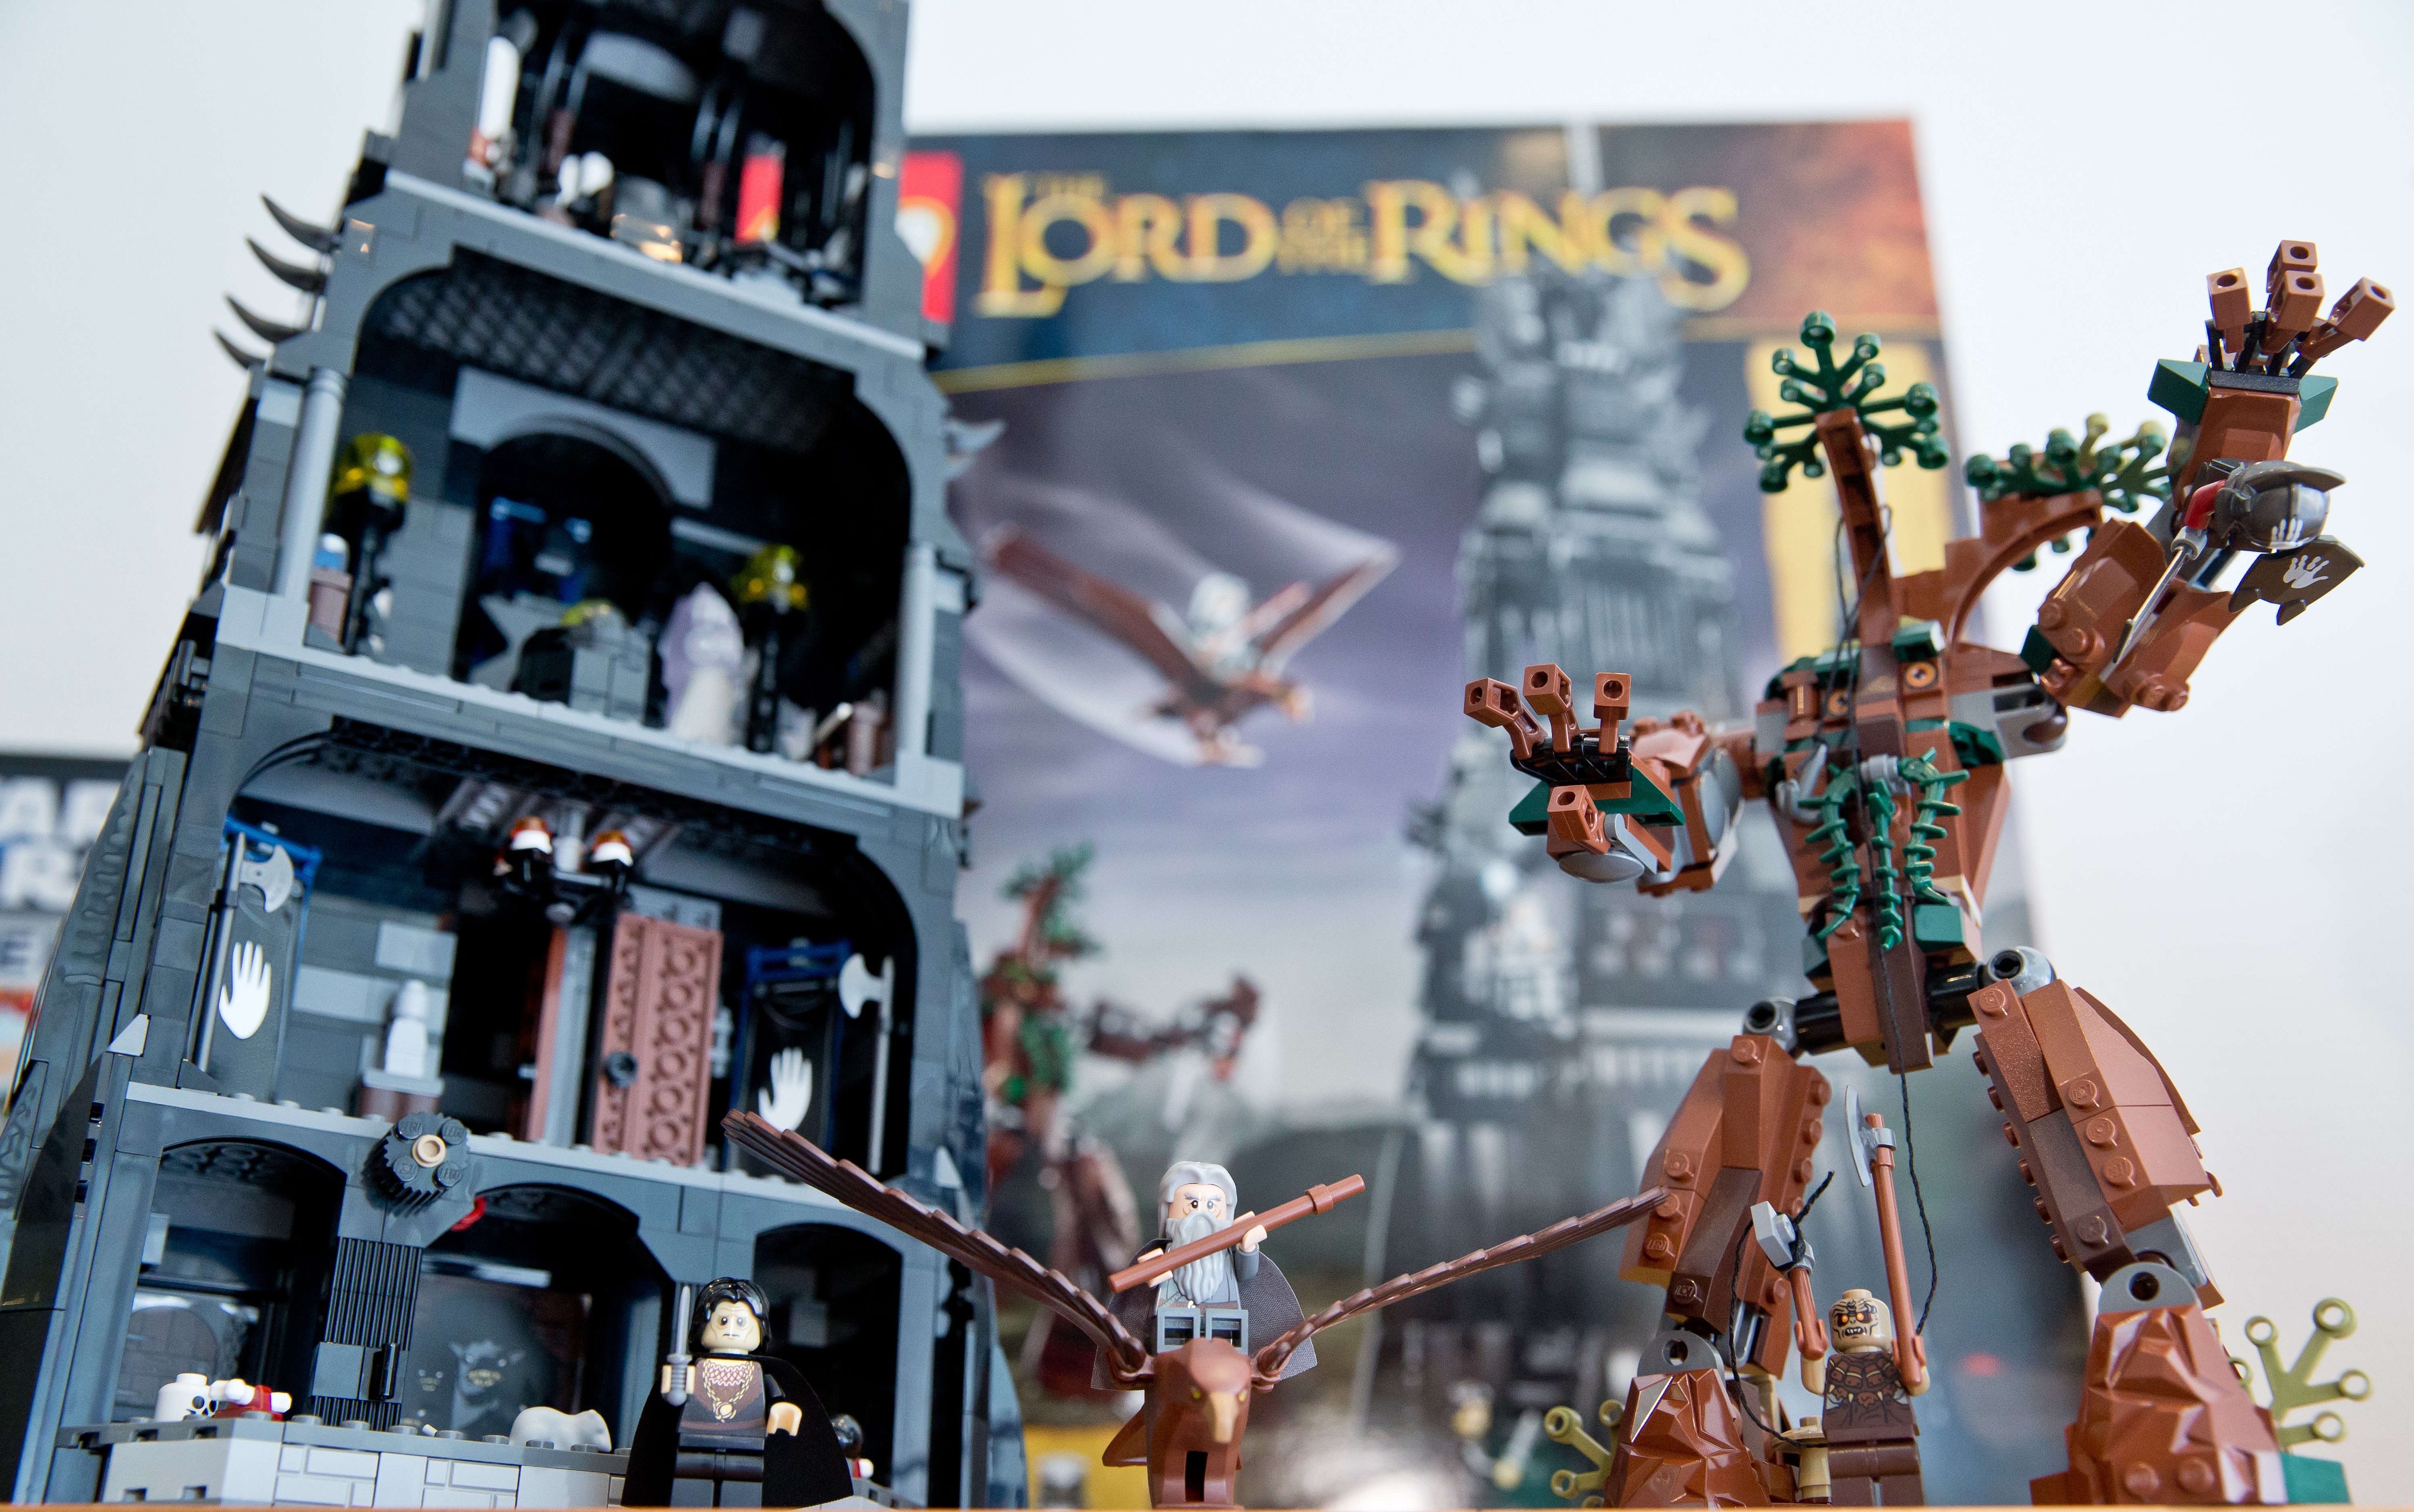 Lord of the Rings Legos breaks Guiness World Record Largest Mini Brick